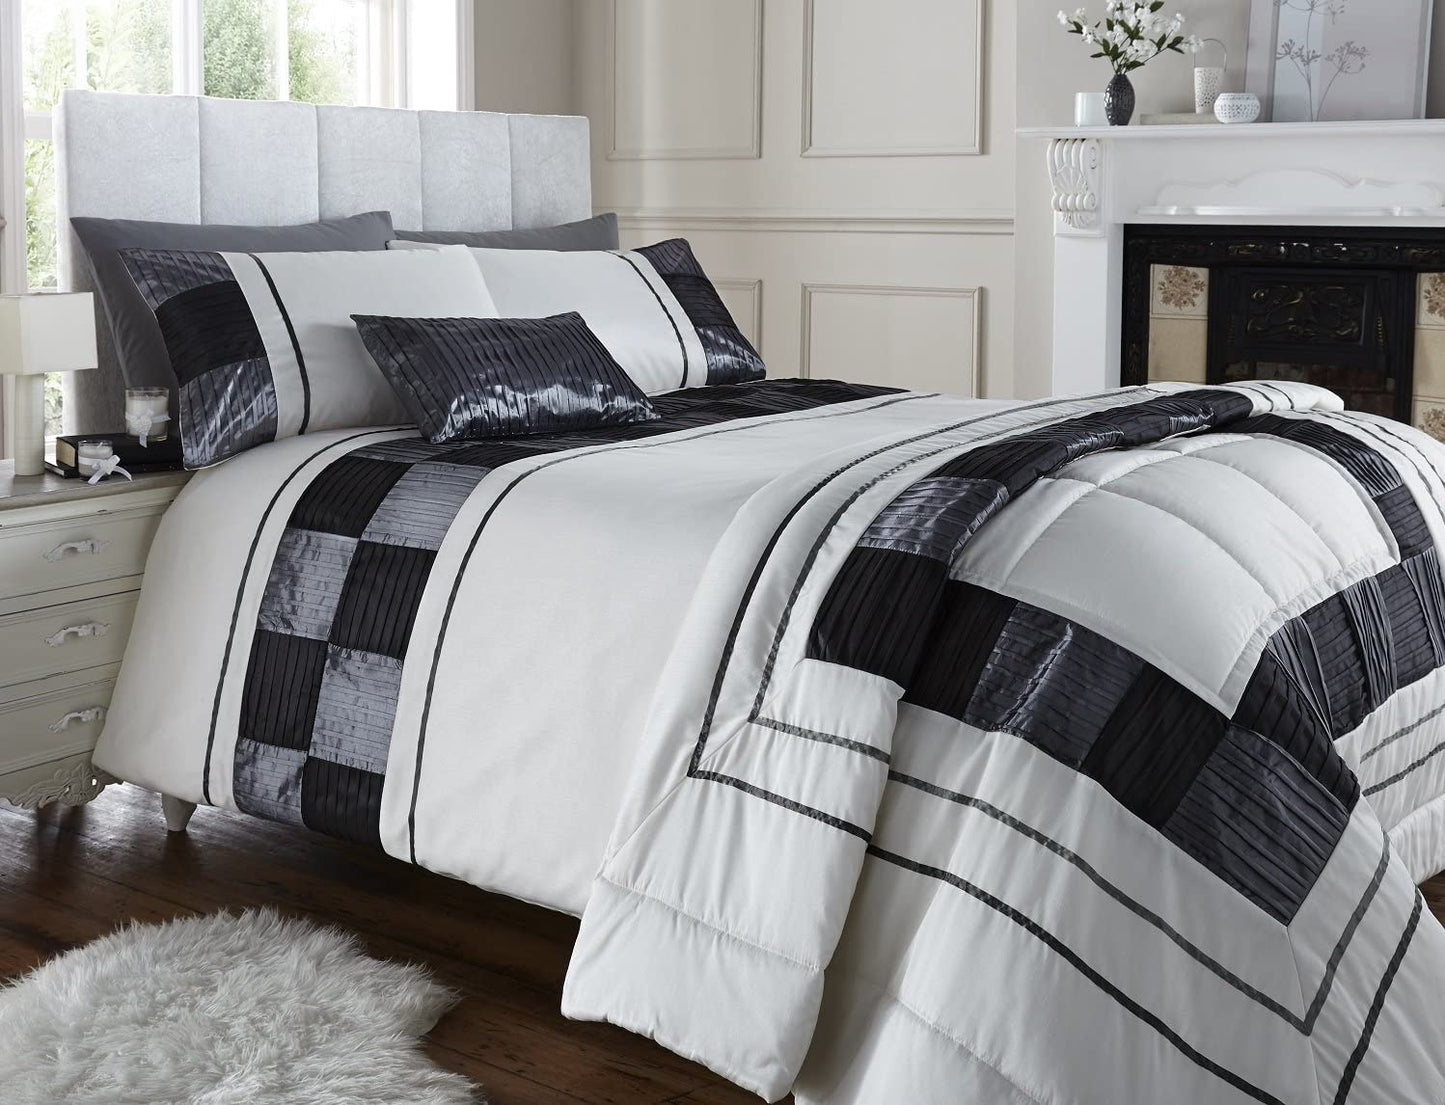 Quilted Bedspread Throwover Cubic Cream Black Metallic Silver 150cm x 200cm